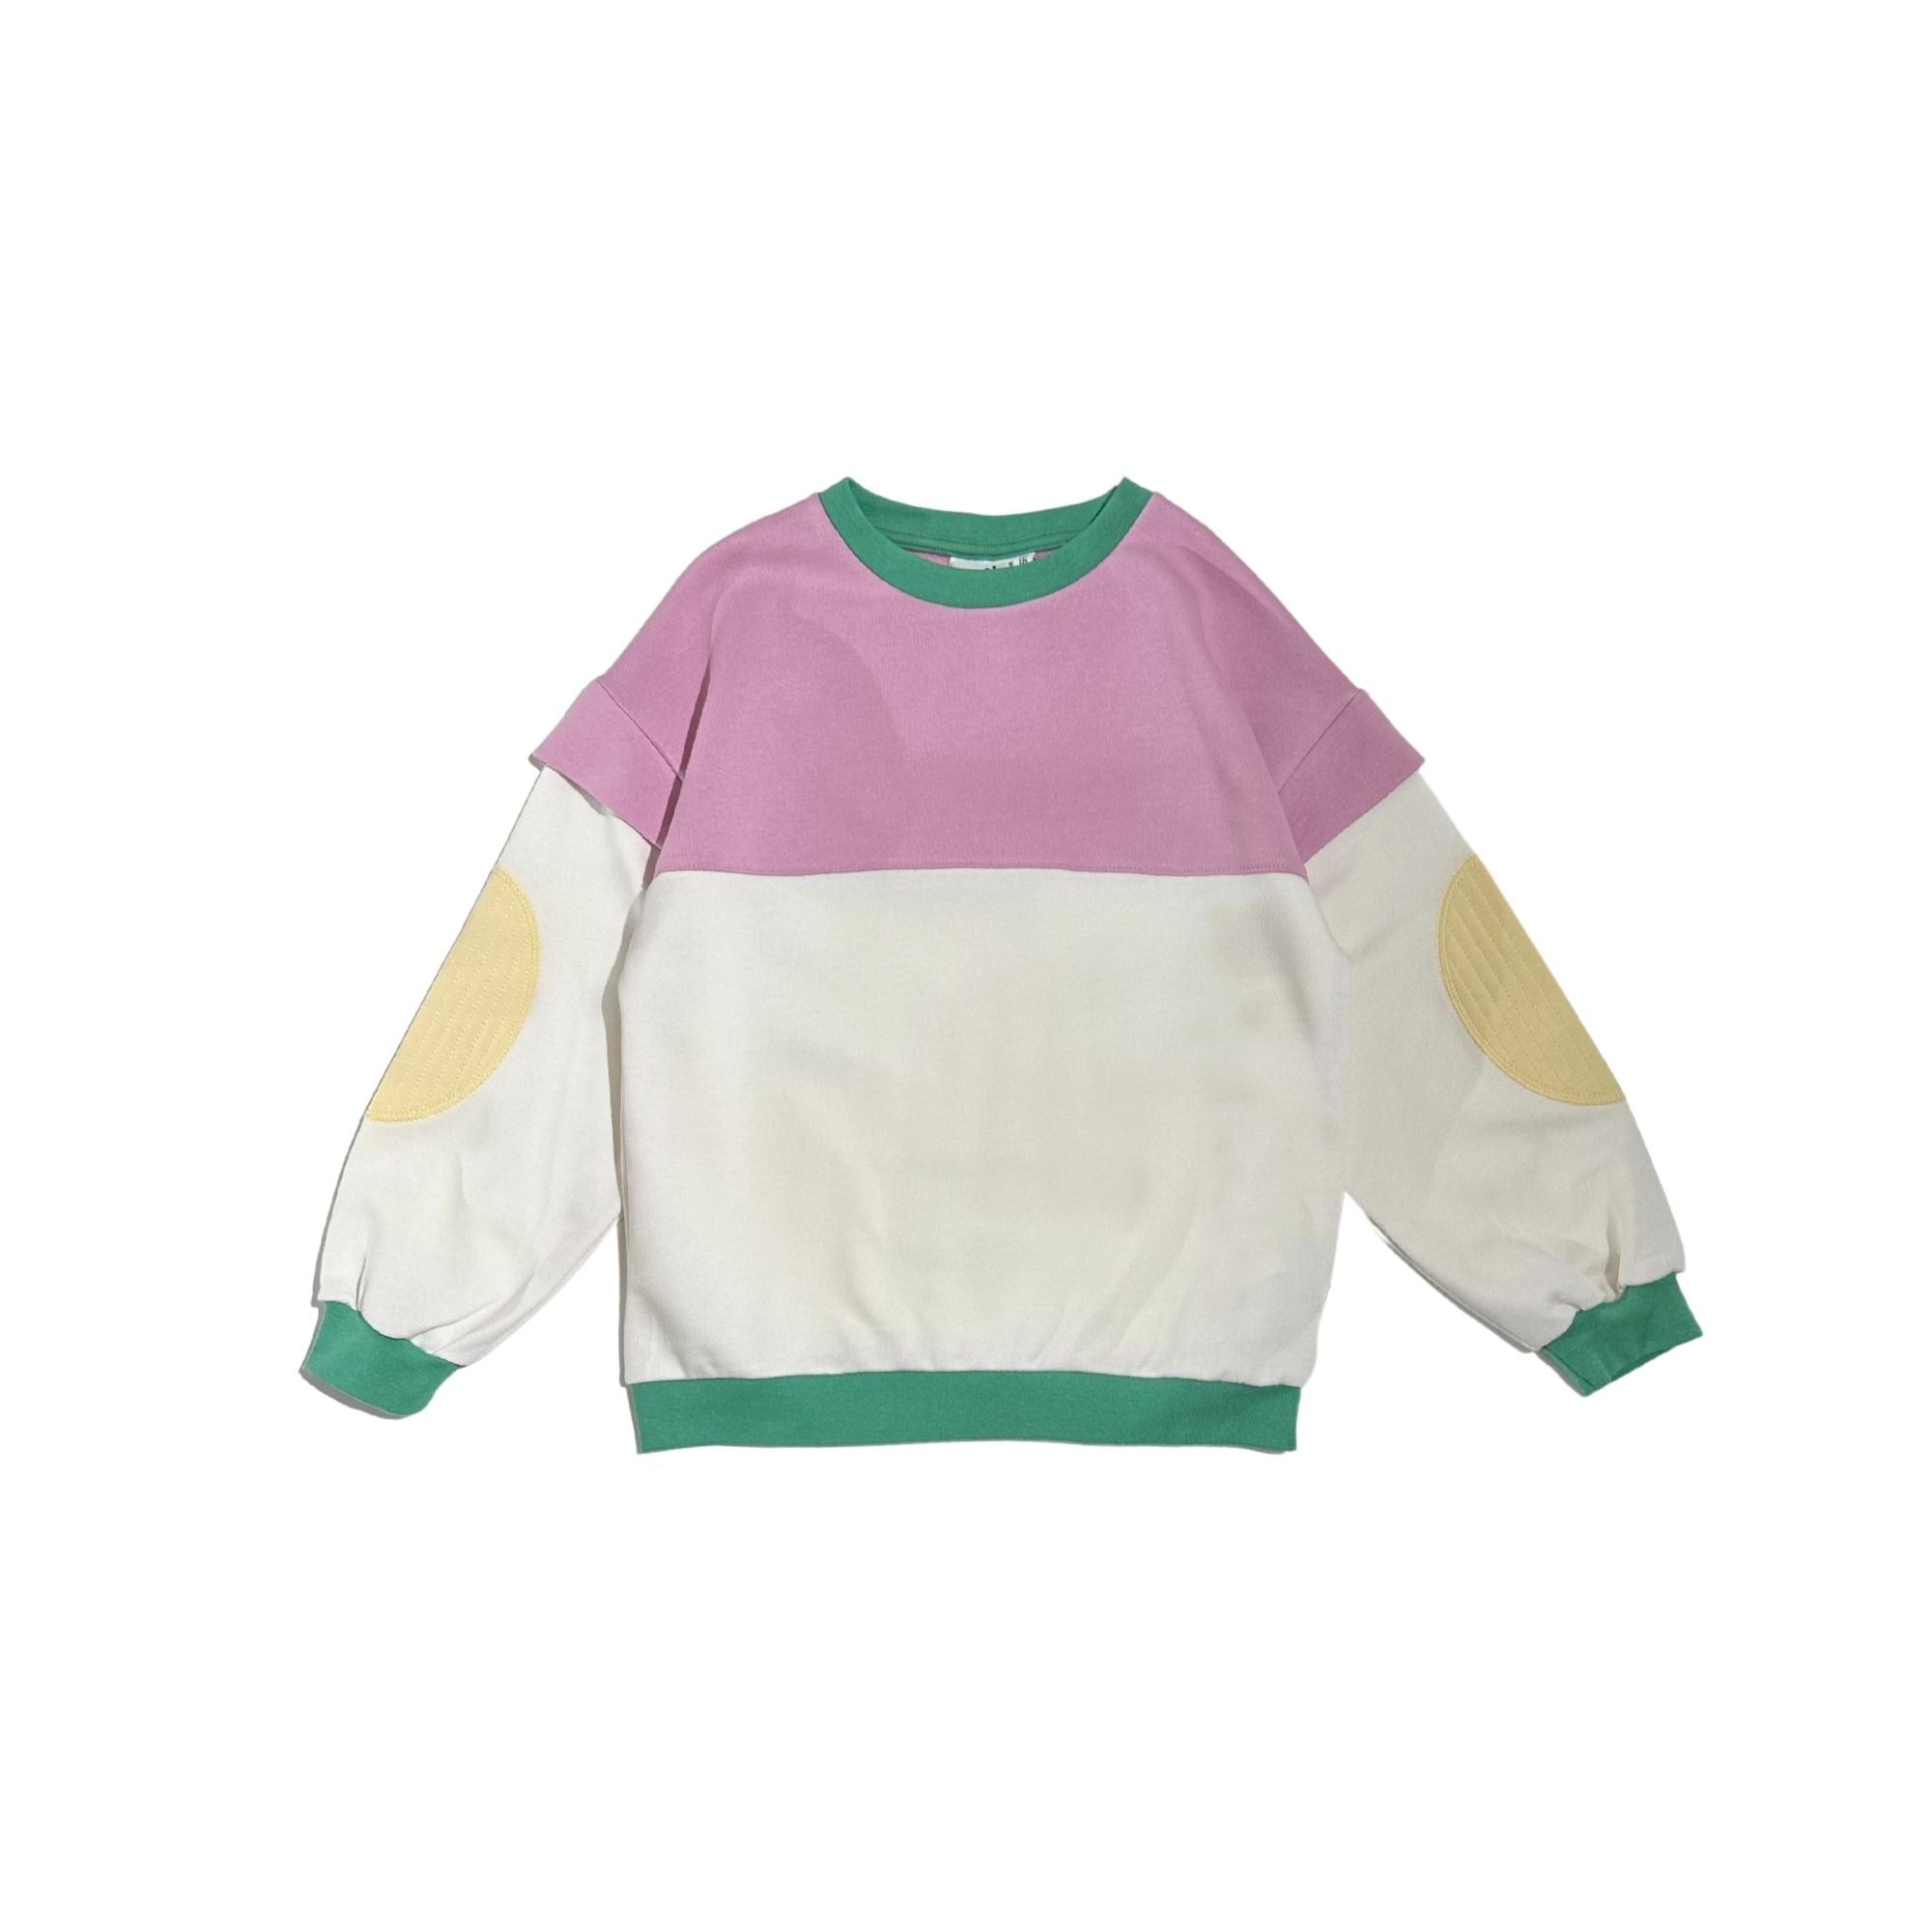 Cos I Said So - winged sweater - color block